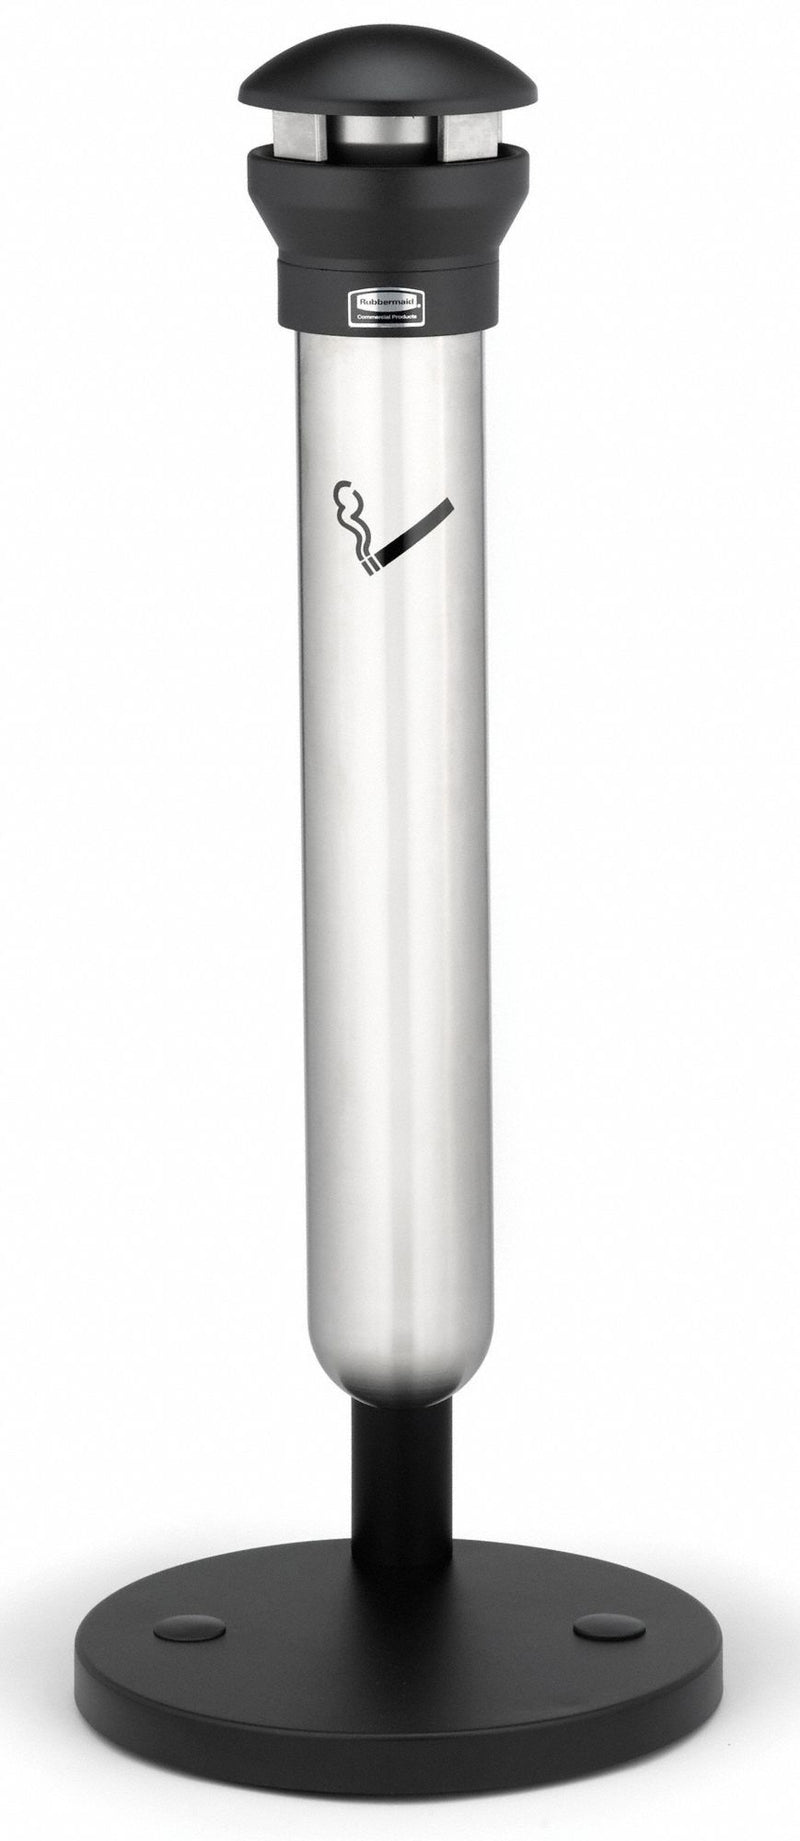 Rubbermaid 1 1/4 gal Cigarette Receptacle, 39 1/2 in Height, 15 1/2 in Base Dia., Metal, Silver - FG9W3100SSBLA